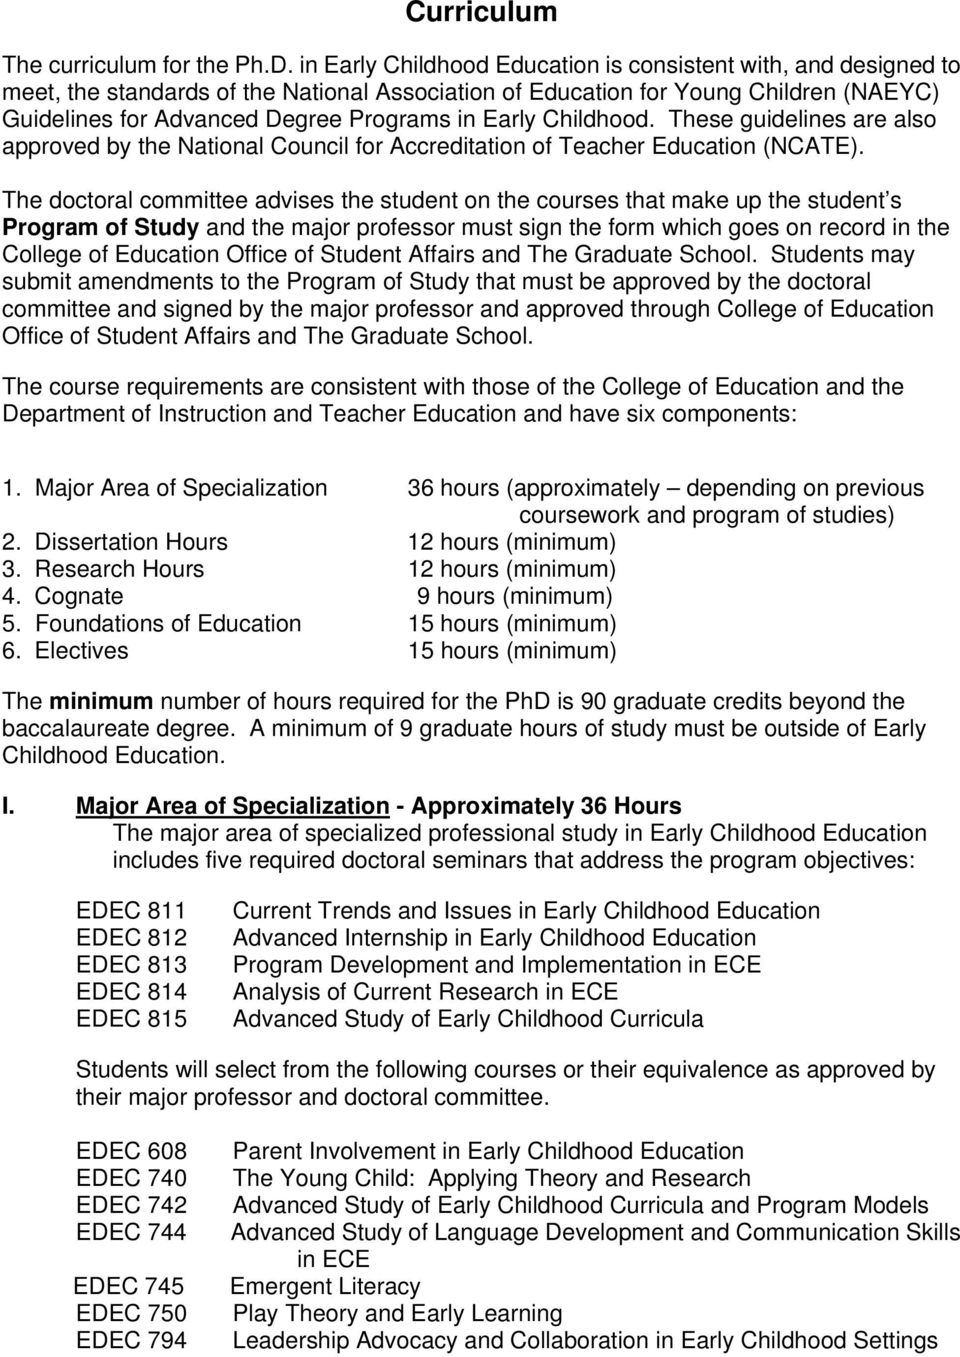 Early Childhood. These guidelines are also approved by the National Council for Accreditation of Teacher Education (NCATE).